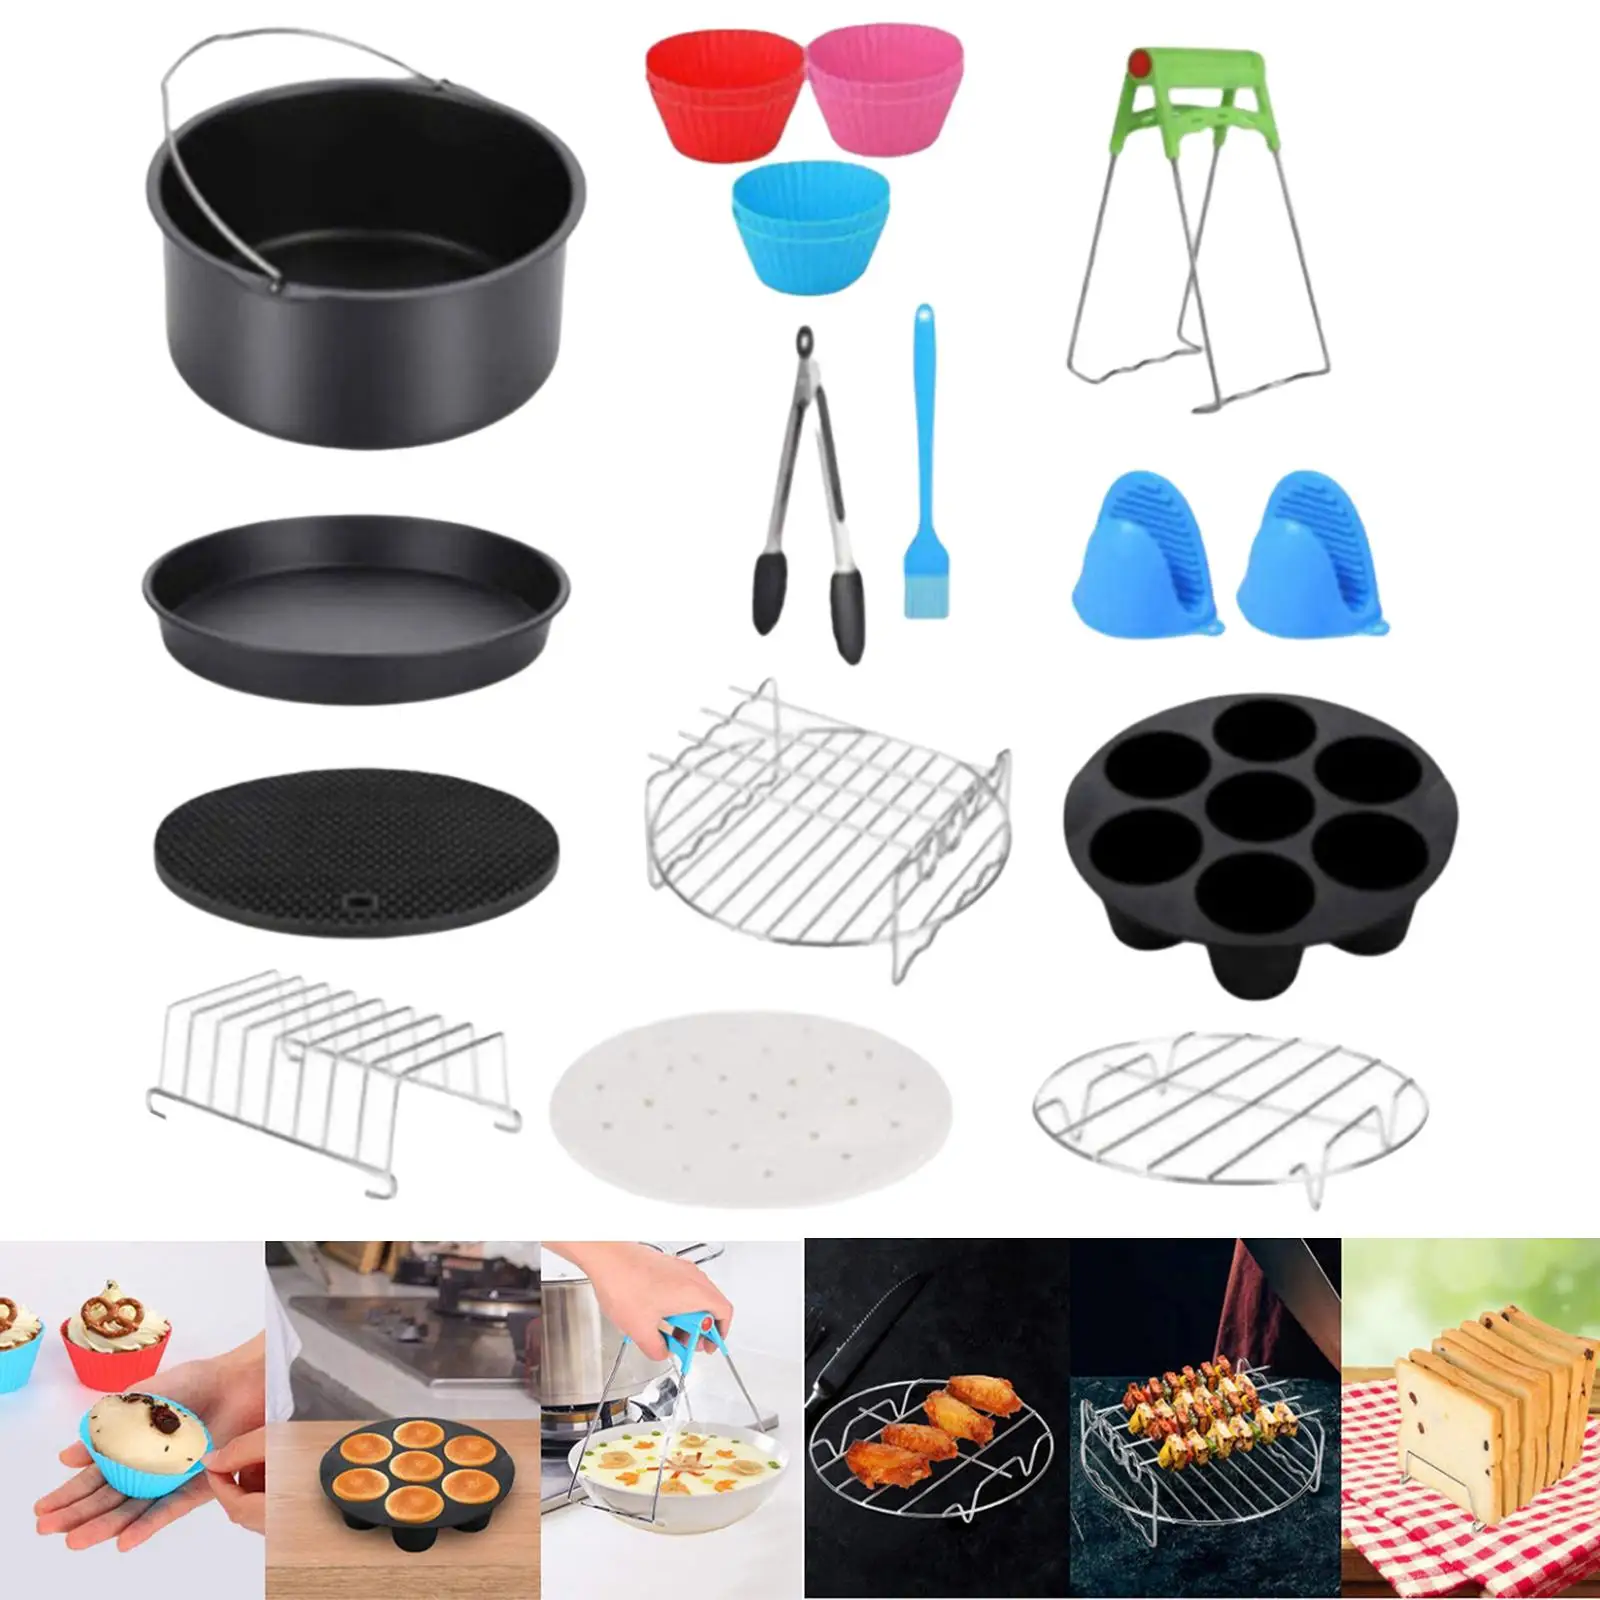 13 Pieces 8 inch Air Fryer Accessories Set for 3.8 to 8Qt Dishwasher Safe Great Gift for Family